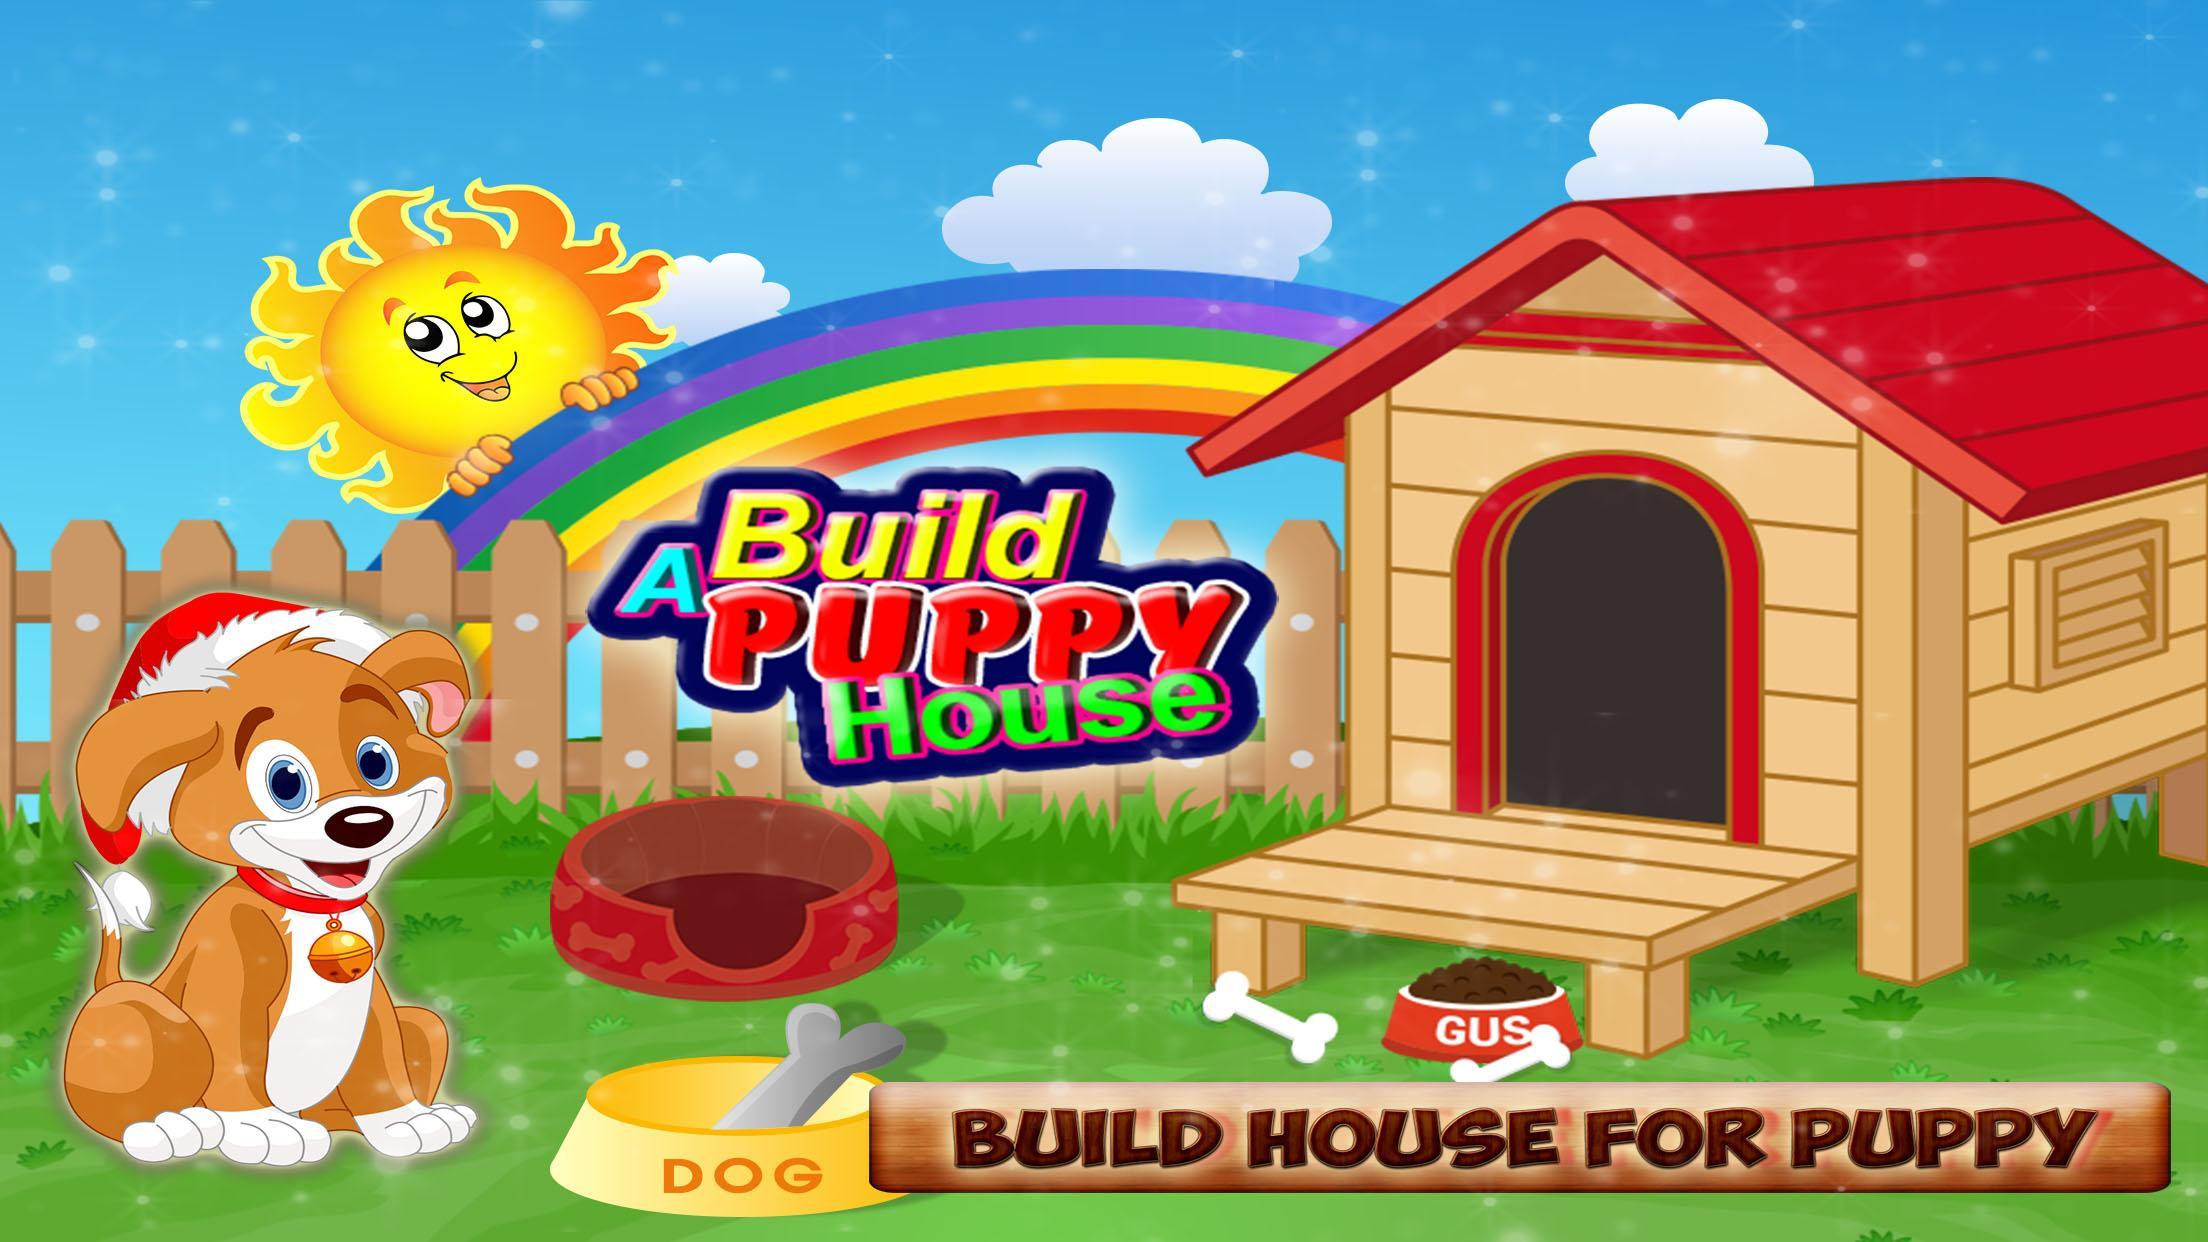 Game dog ru. Dog House game. Dog House game: Pet Home decoration game. Sunny House игра. Dog House game лапка.